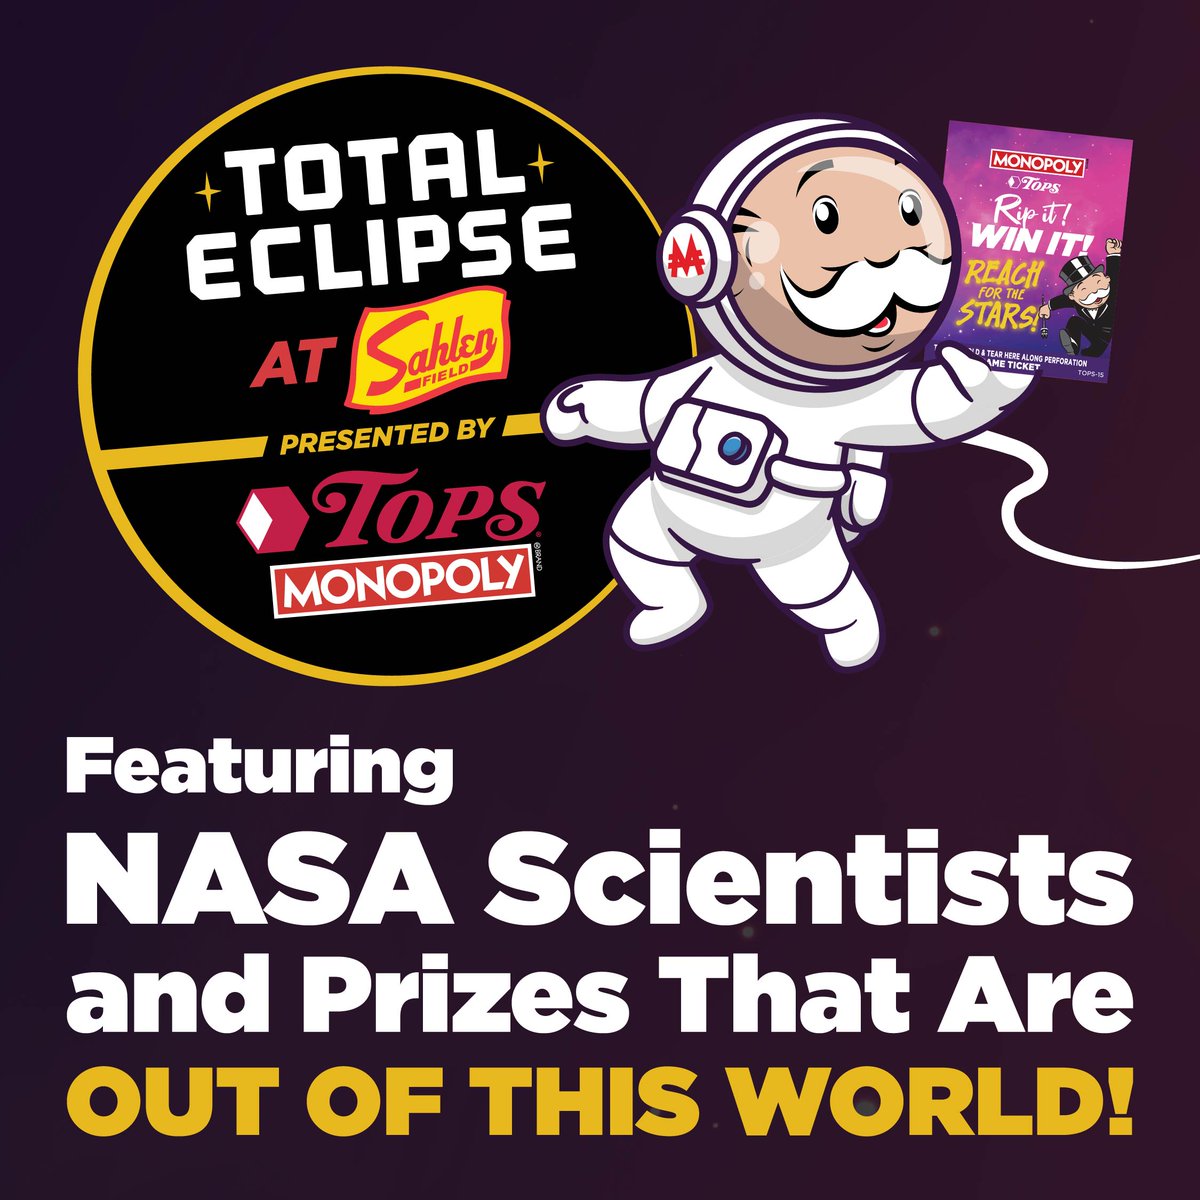 The time is almost here! Join us at the Total Eclipse at Sahlen Field Presented by Tops Monopoly event on April 8th! Don’t miss out on the chance to win one of 1,000 Tops Monopoly tickets that were launched into space.🚀Click here bit.ly/3vrxIaj to learn more today.